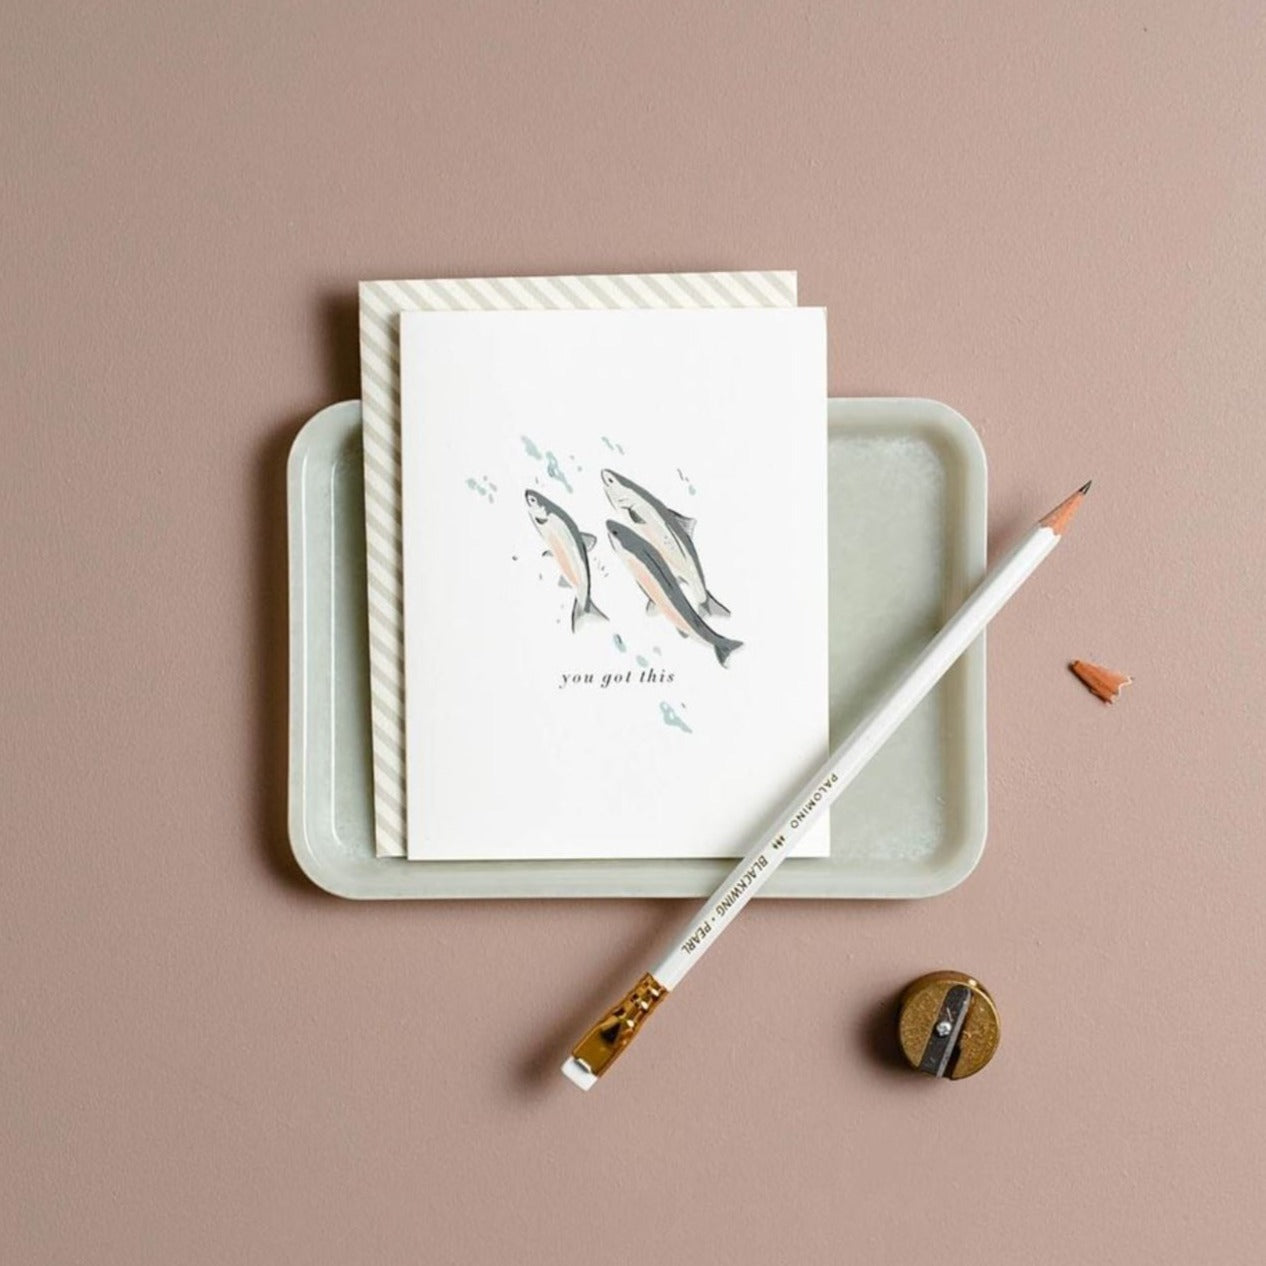 Illustrated 'You Got This' greeting card featuring three fish jumping upstream, displayed on a tray with a pencil and pencil sharpener, all set against a beige background.